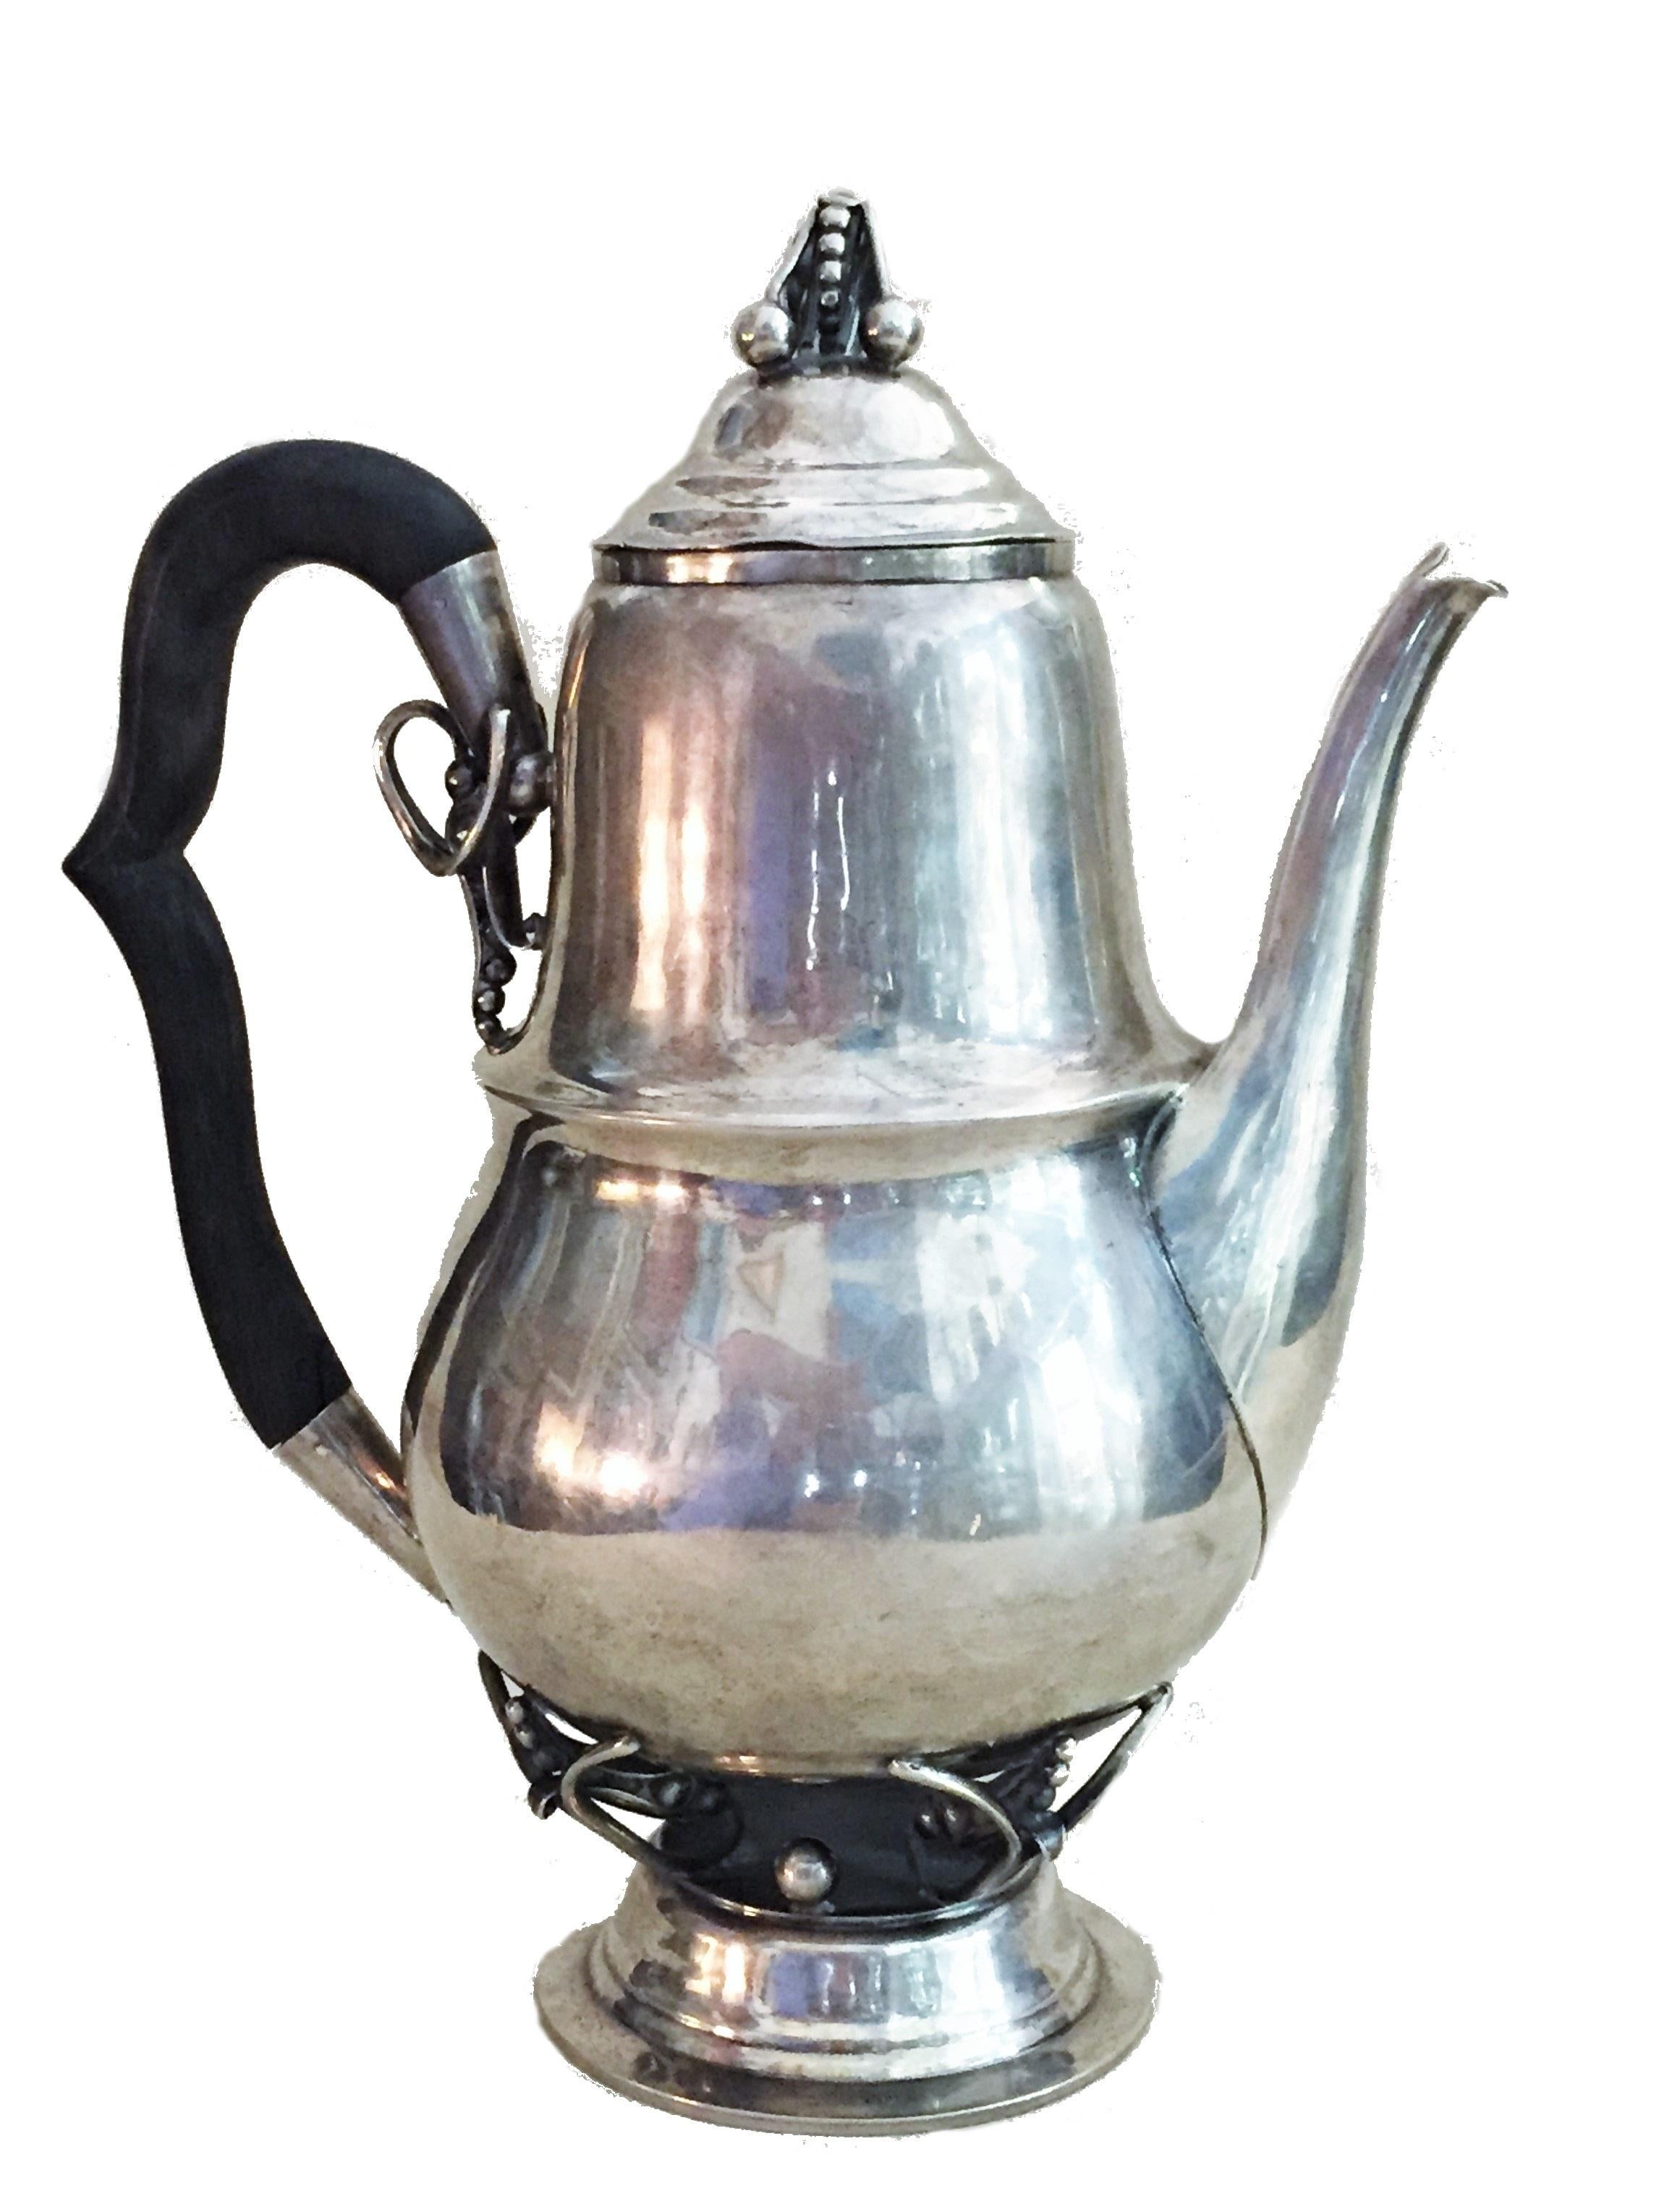 Dimensions & weight:
Height: 10.75 inches
Width: 3-1/2 inches
Depth: 5.25 inches
Weight: 27.4 troy oz

This wonderful sterling silver & wood coffee & tea kettle, made by the famous New York master-silversmith William Lawrence deMatteo, very